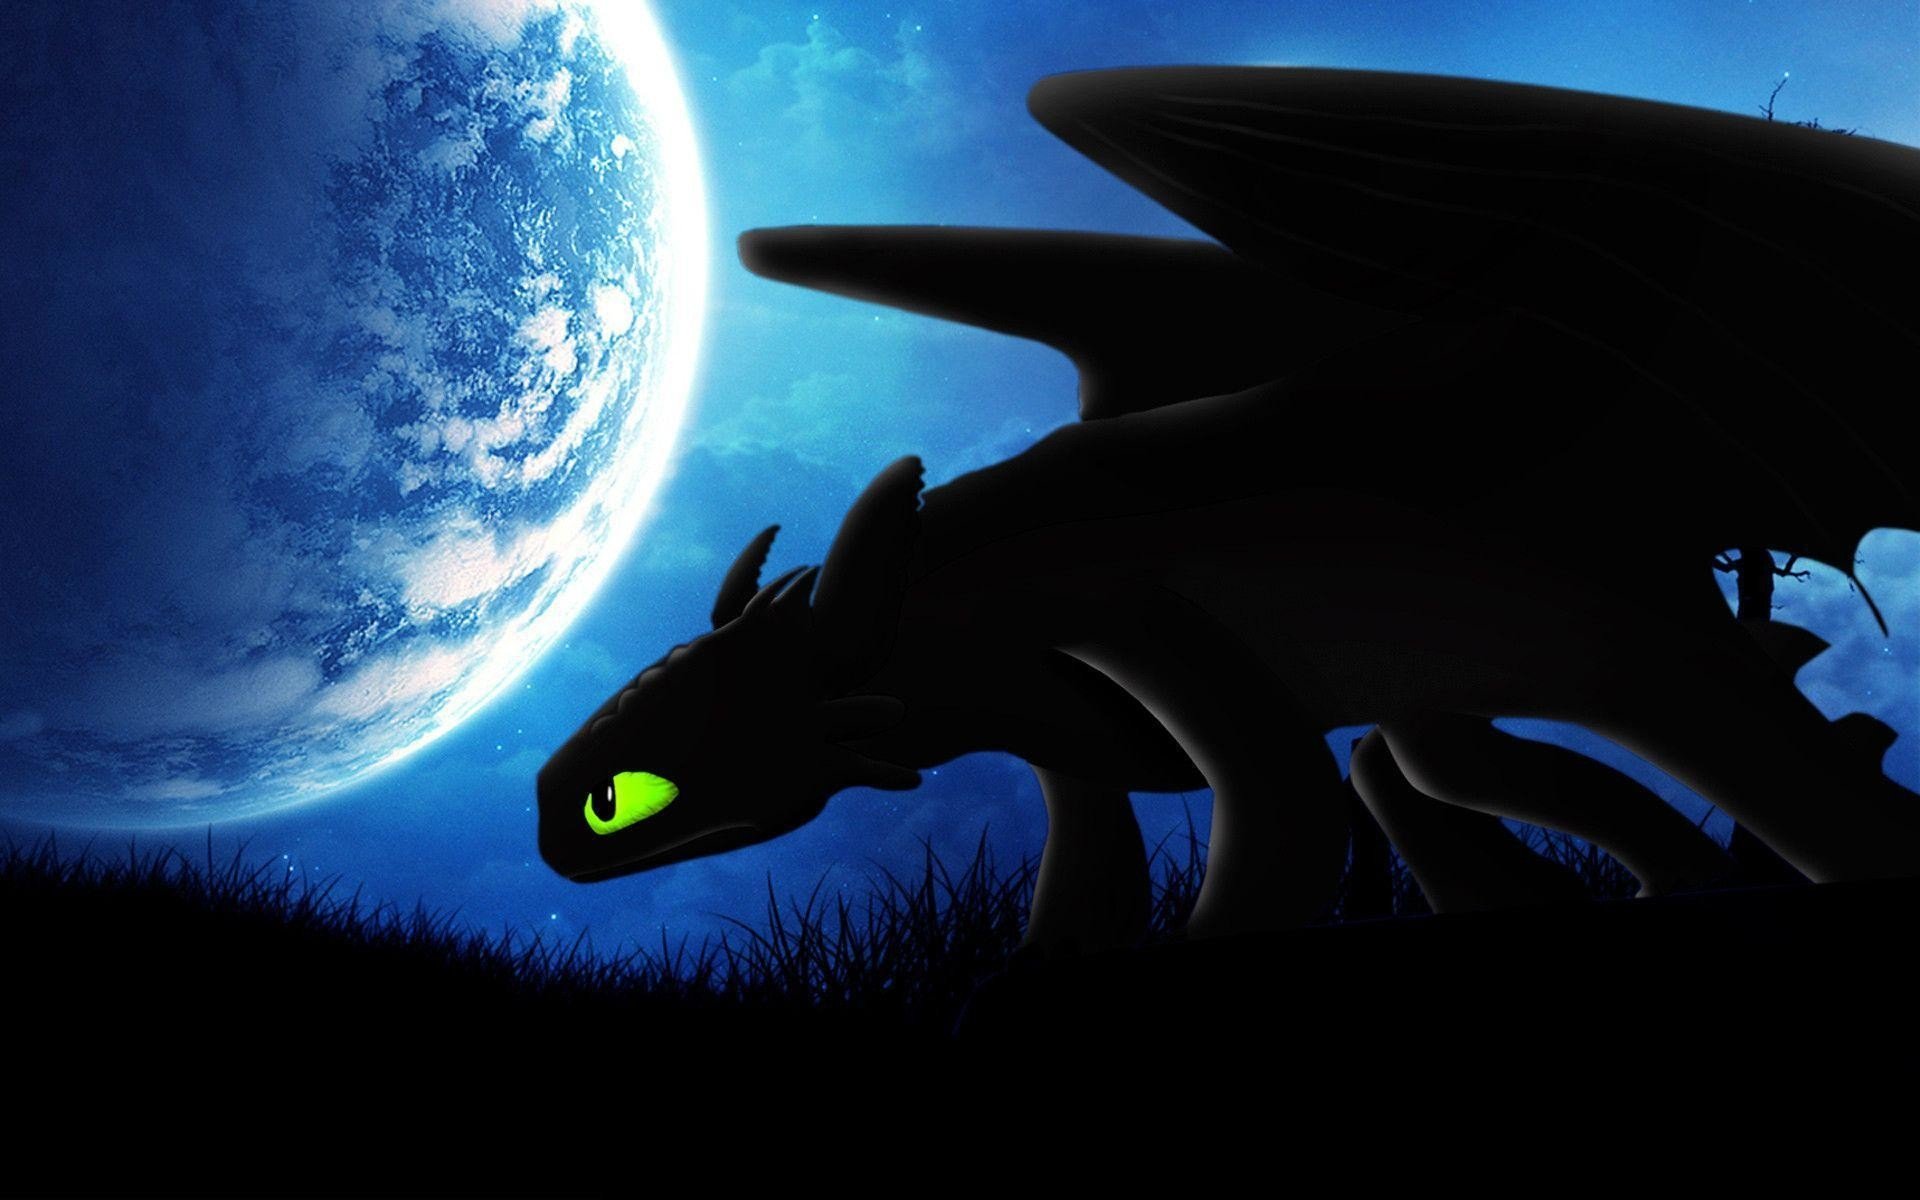 130 Toothless How to Train Your Dragon HD Wallpapers and Backgrounds